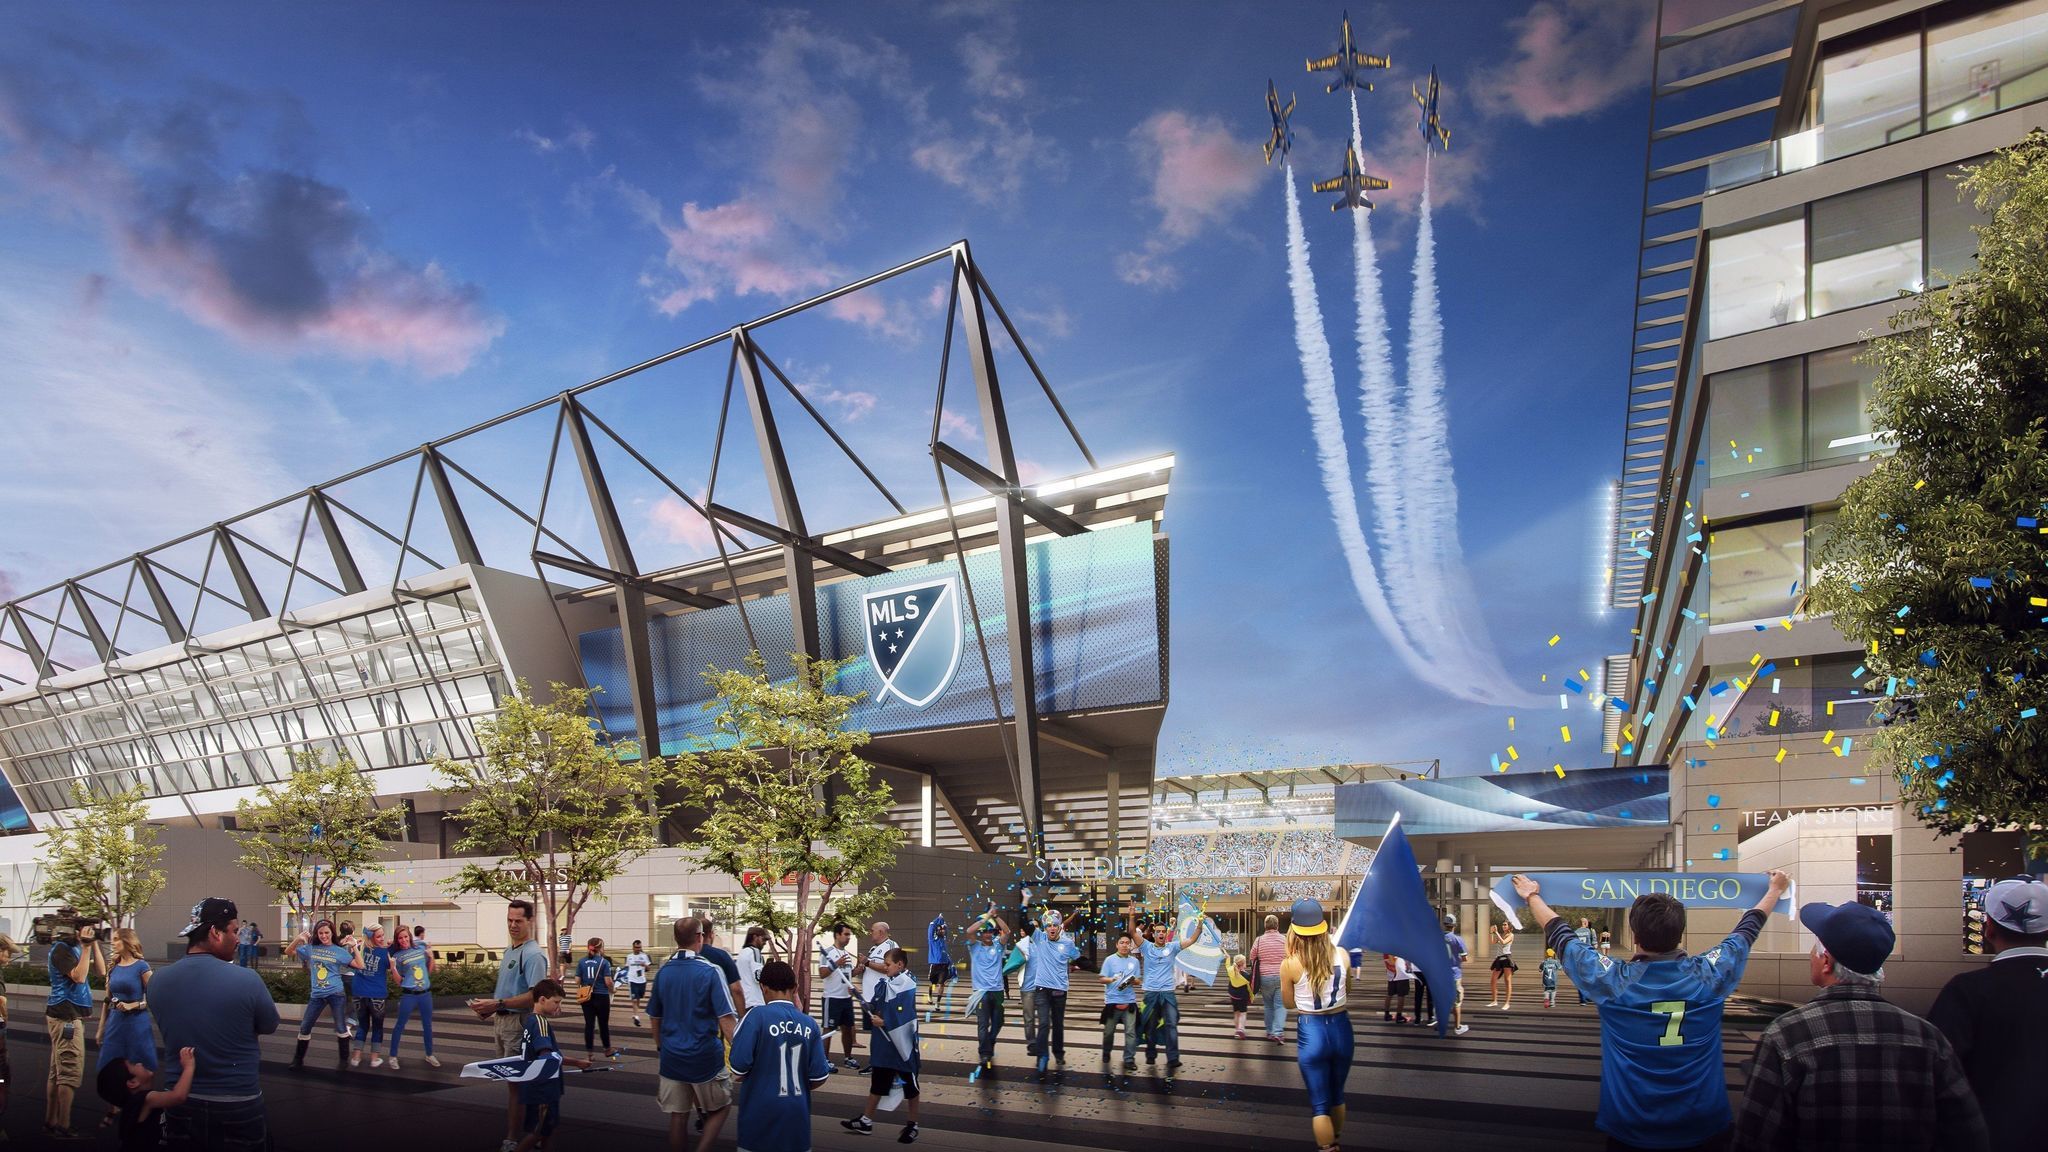 Gensler Sports produced this artist's rendering of what a 30,000-seat Major League Soccer stadium might look like at the Qualcomm Stadium property.